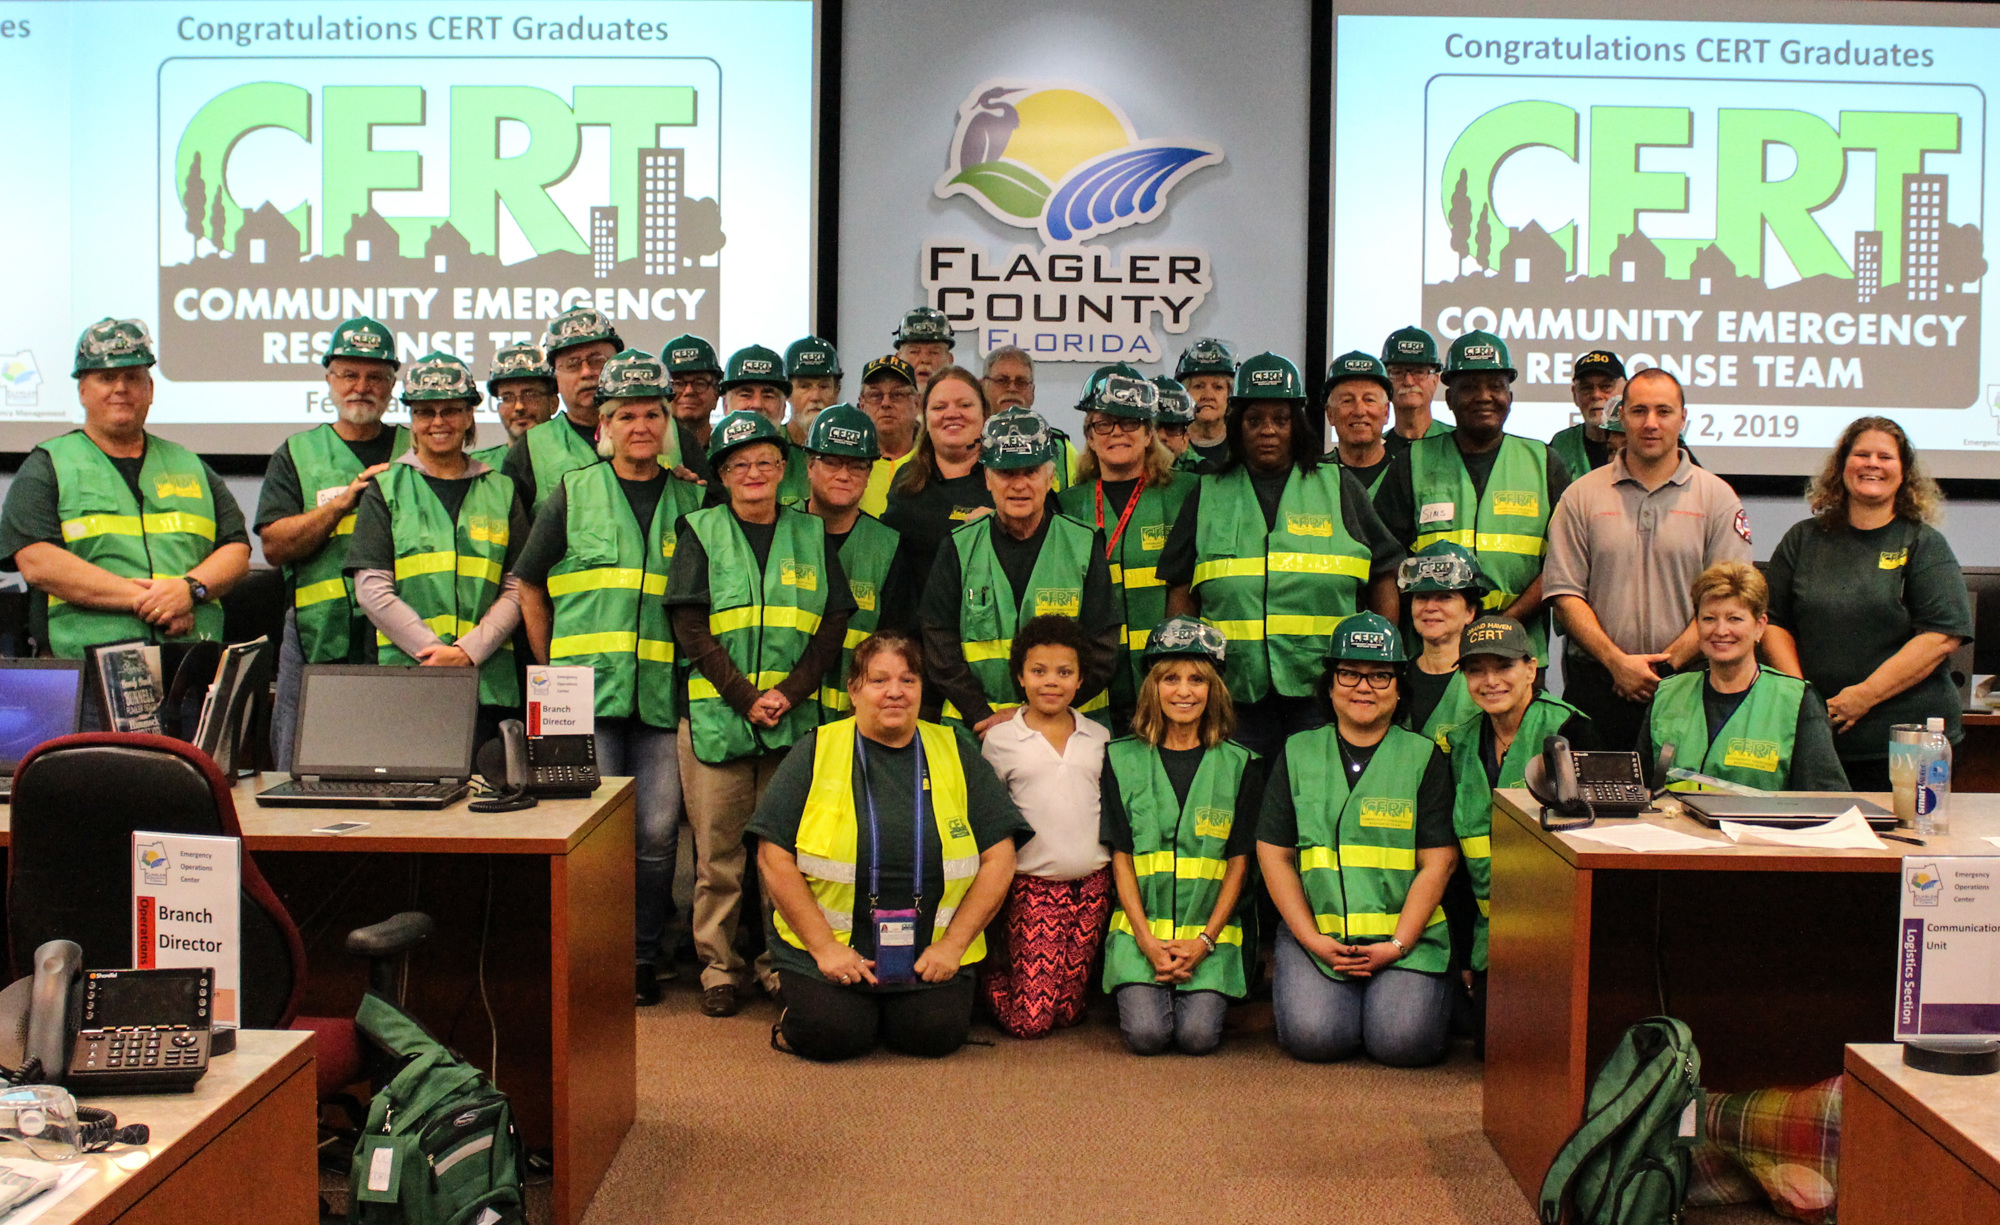 Two dozen residents graduated from Community Emergency Response Team training. Photo courtesy of Flagler County government